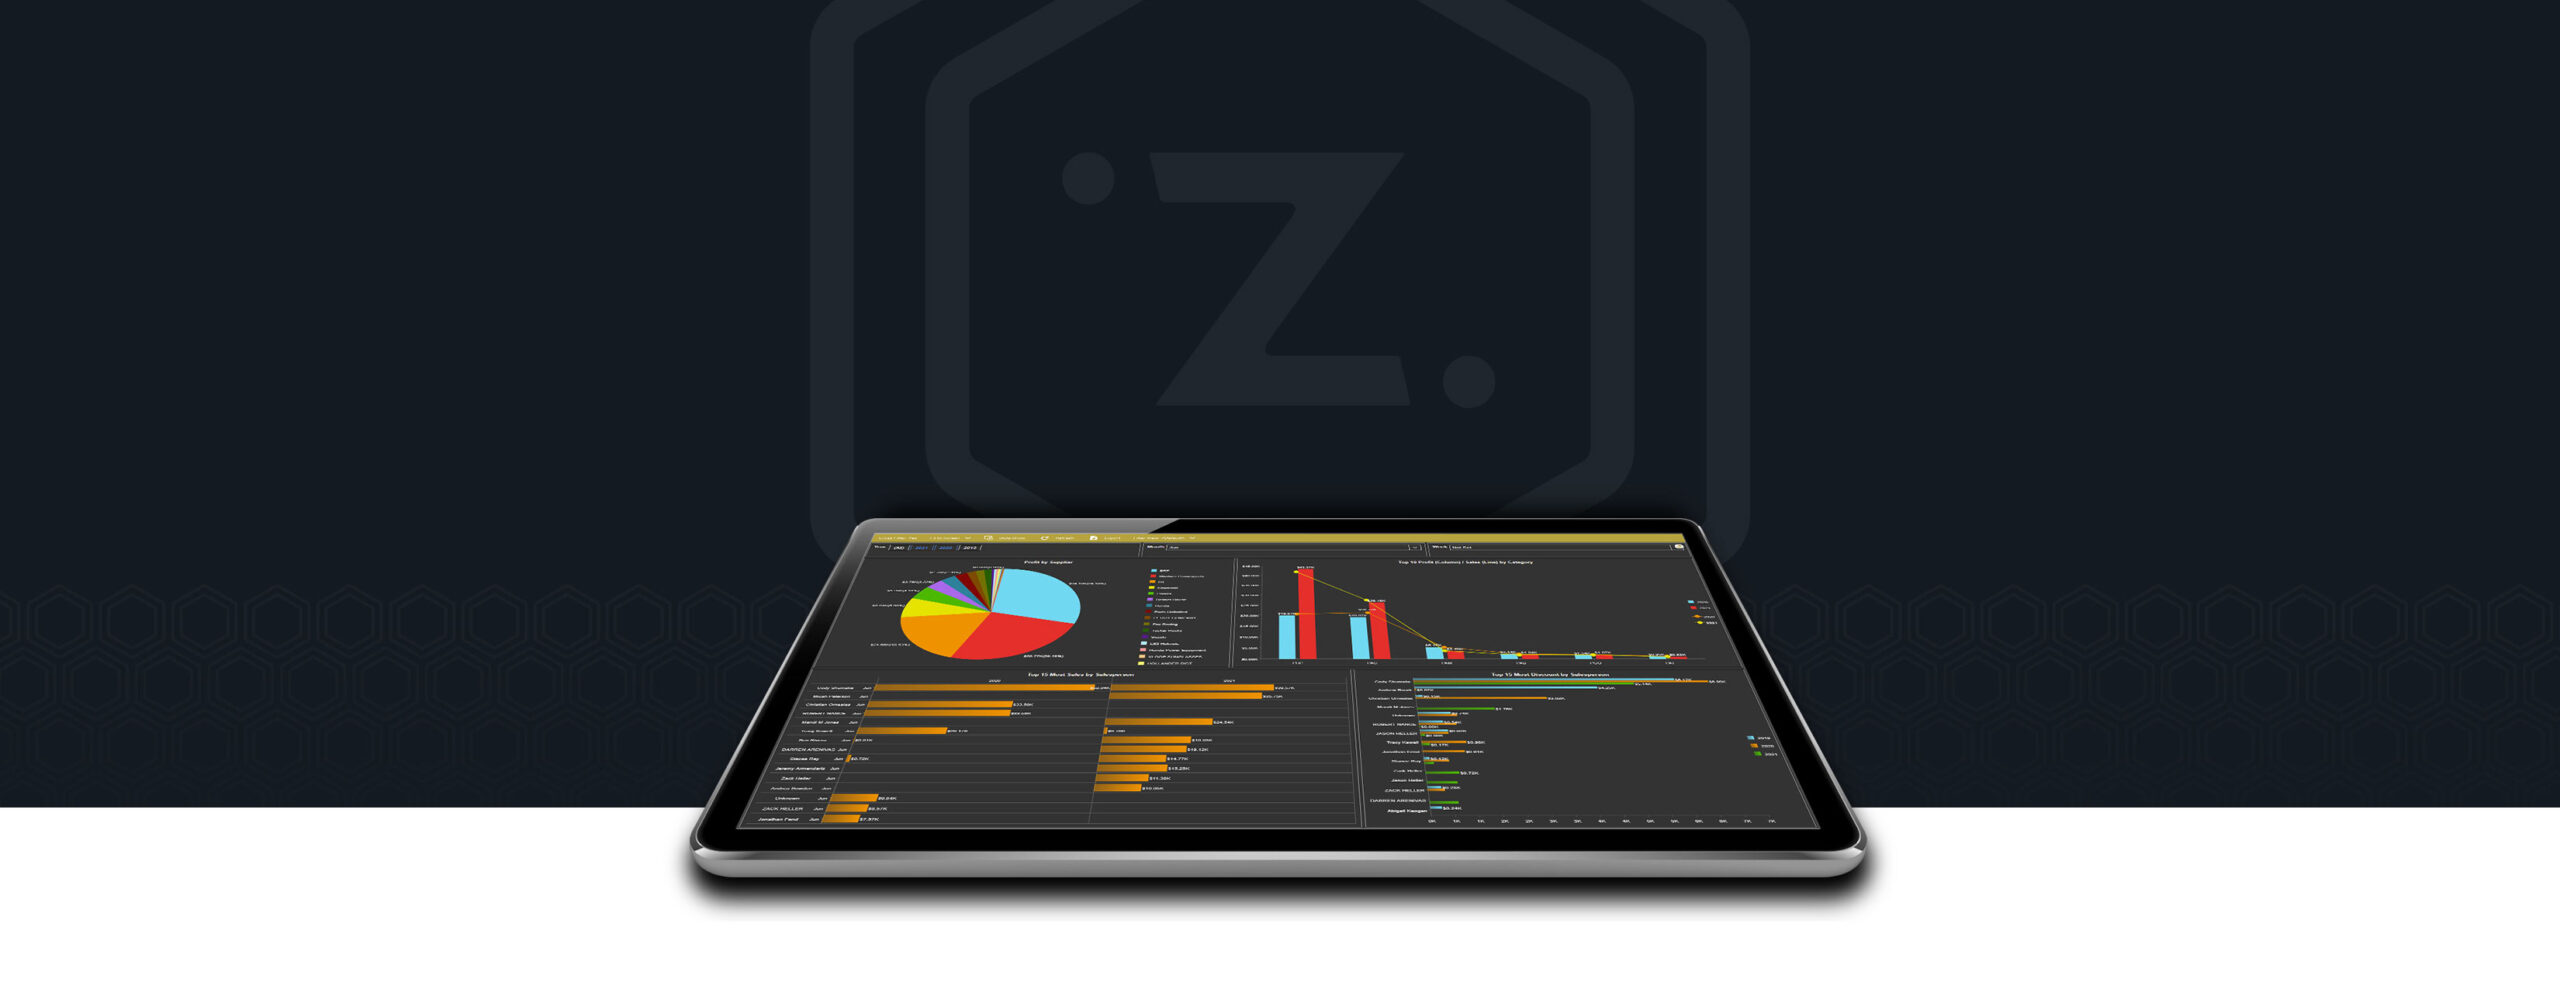 ZiiDMS is designed for large and multi-rooftop dealership groups